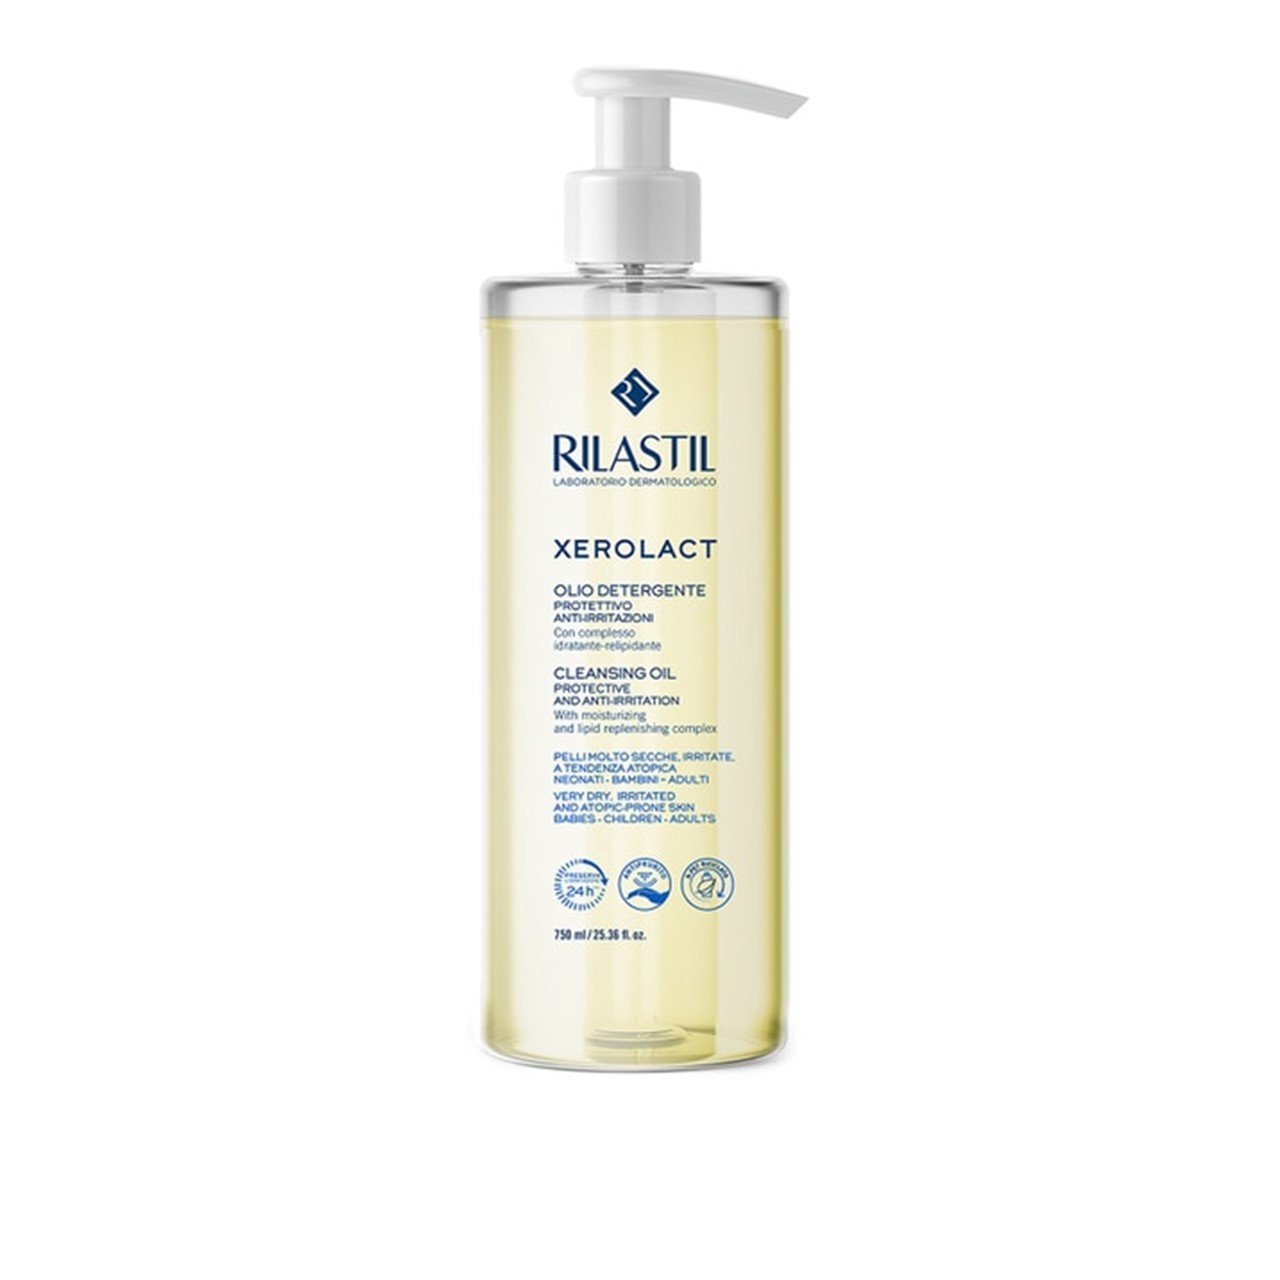 Rilastil Xerolact Cleansing Oil Protective and Anti-Irritation 750ml